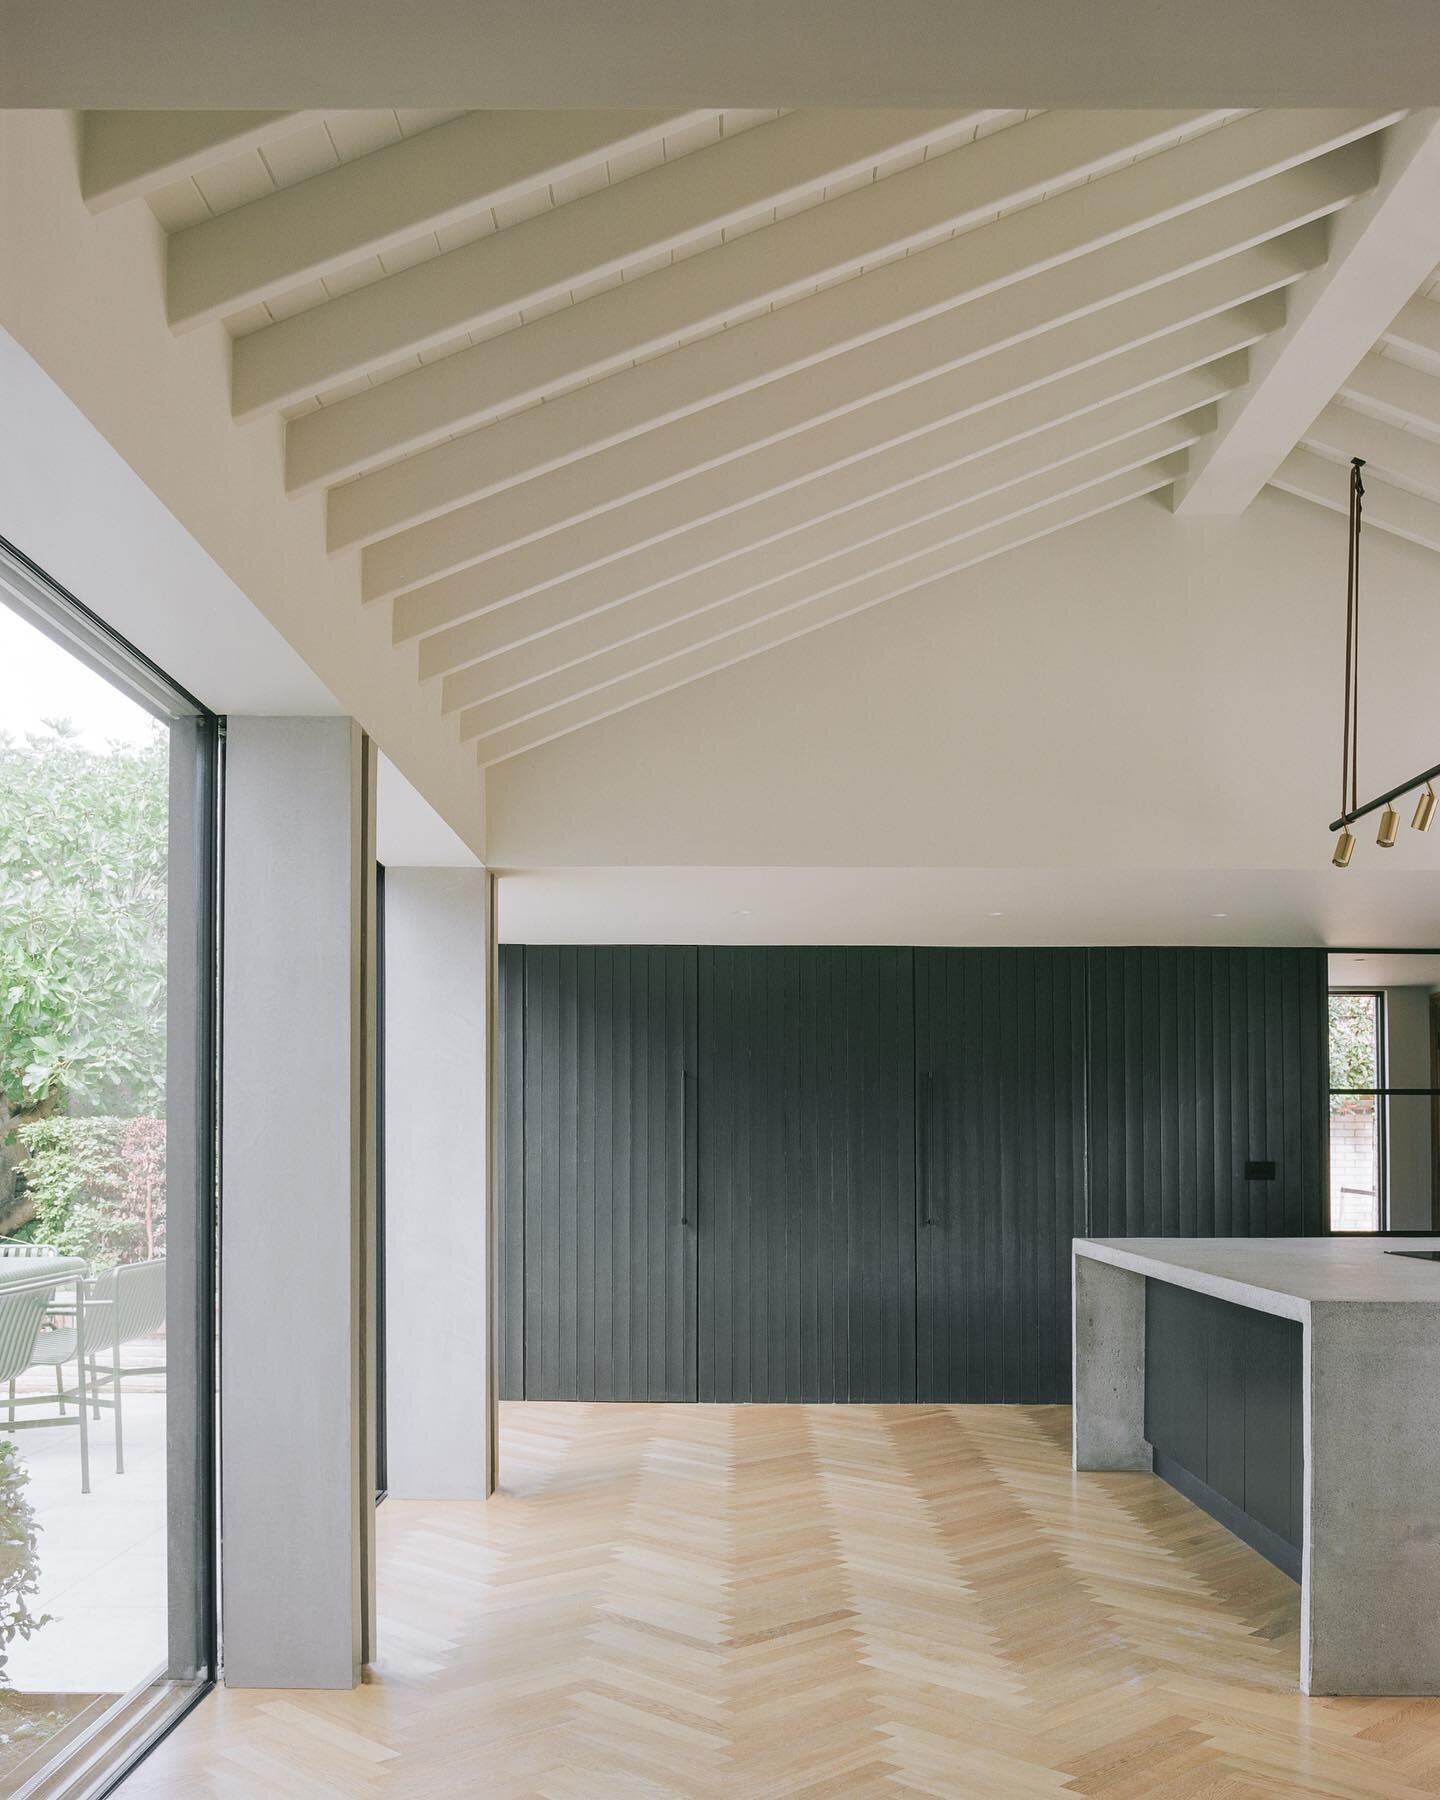 Follyfield | Kitchen

Swipe for sketches and renders as we worked through early design ideas and joinery details. The vaulted space (clad in timber boards) acts as connector between the old stone building and the contemporary brick extension. A panel